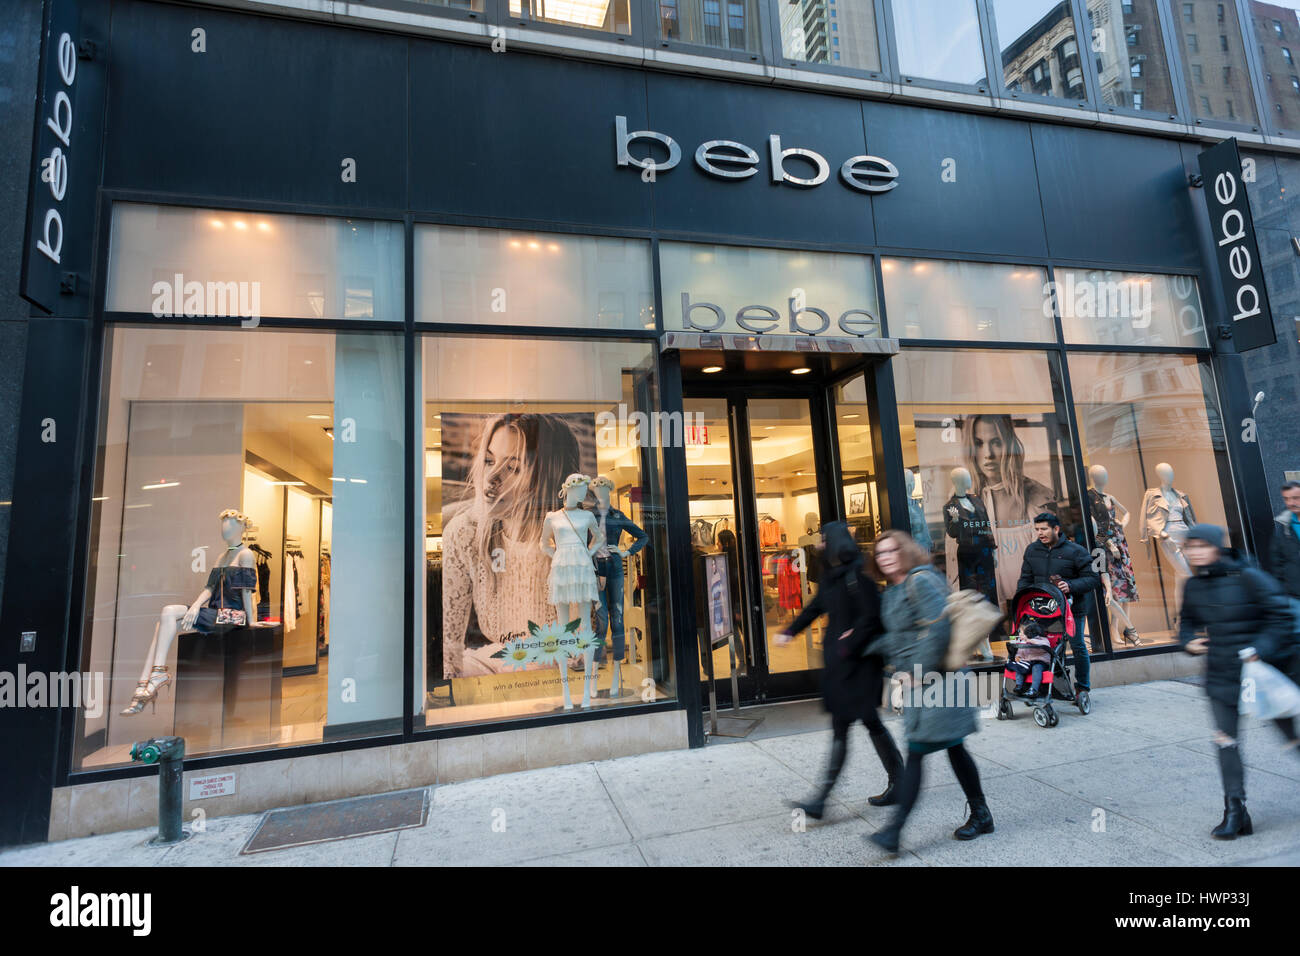 A Bebe women's apparel store in Herald Square in New York on Tuesday, March 21, 2017. Bebe is reported to be closing all of its stores and will only be an online presence. The plan is an effort for the women's apparel retailer to avoid filing for bankruptcy. (© Richard B. Levine) Stock Photo